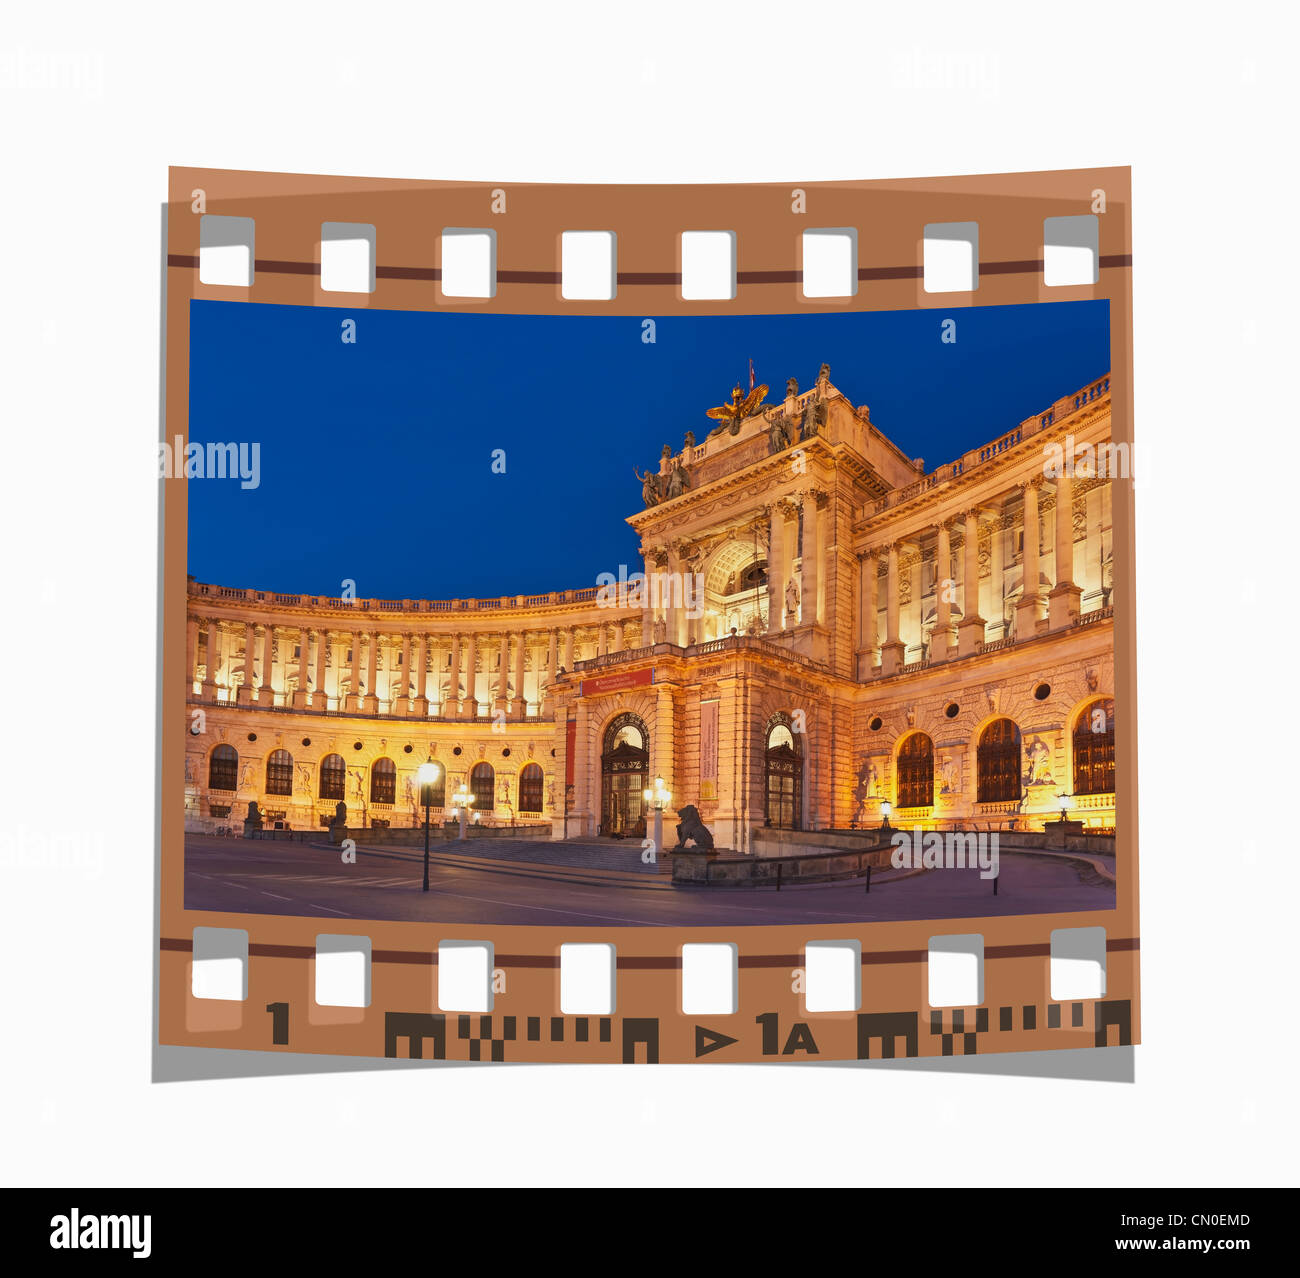 Filmstrip: The New Castle is part of Vienna's Hofburg Palace and the monumental Imperial Forum, Vienna, Austria, Europe Stock Photo